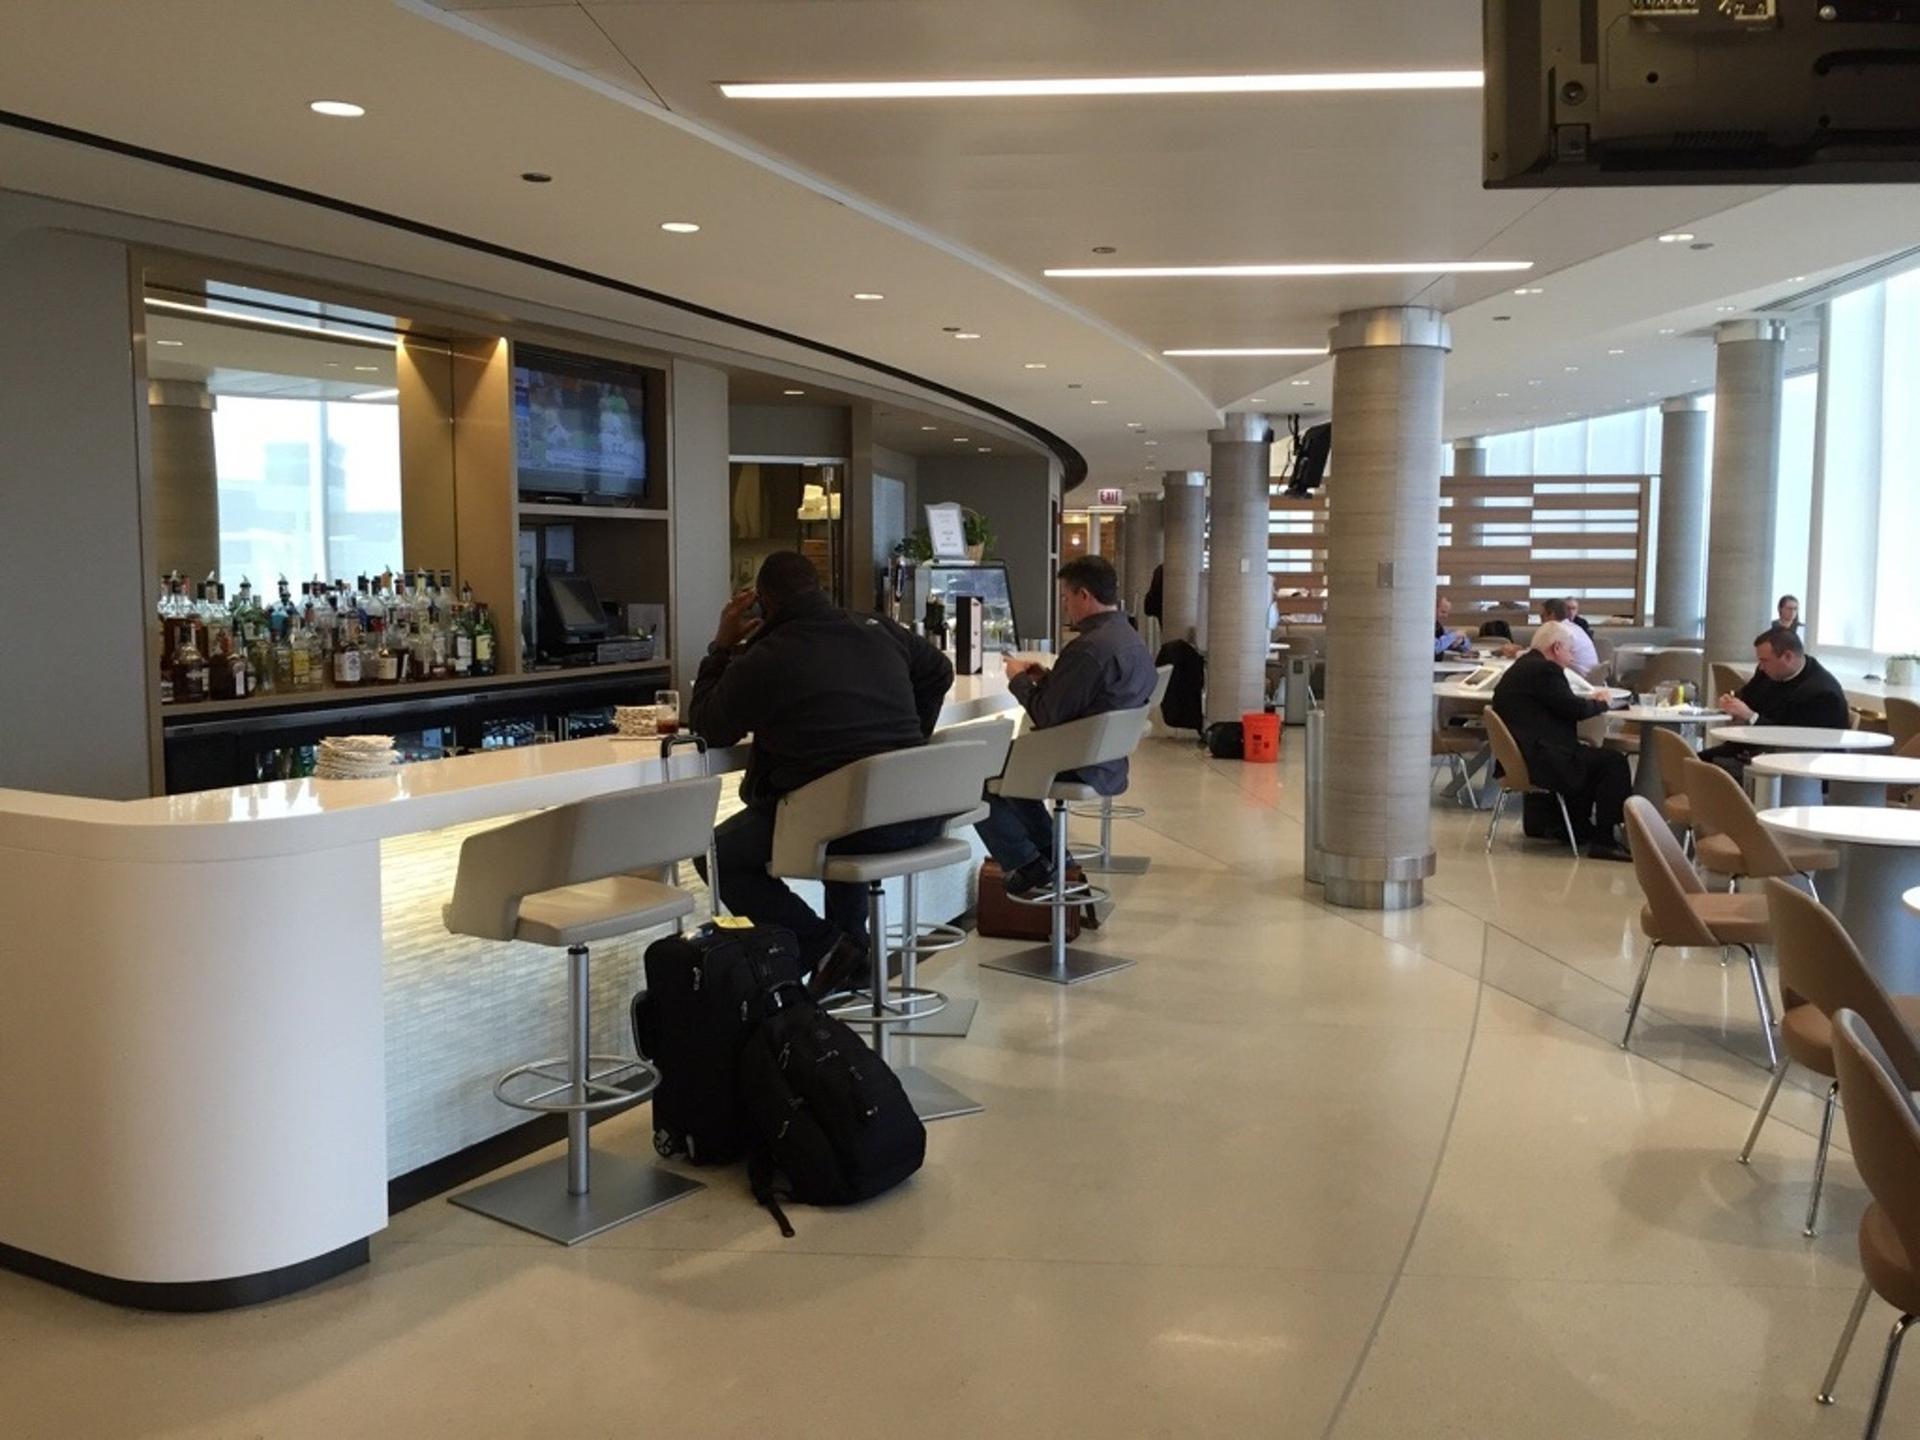 American Airlines Admirals Club image 47 of 50